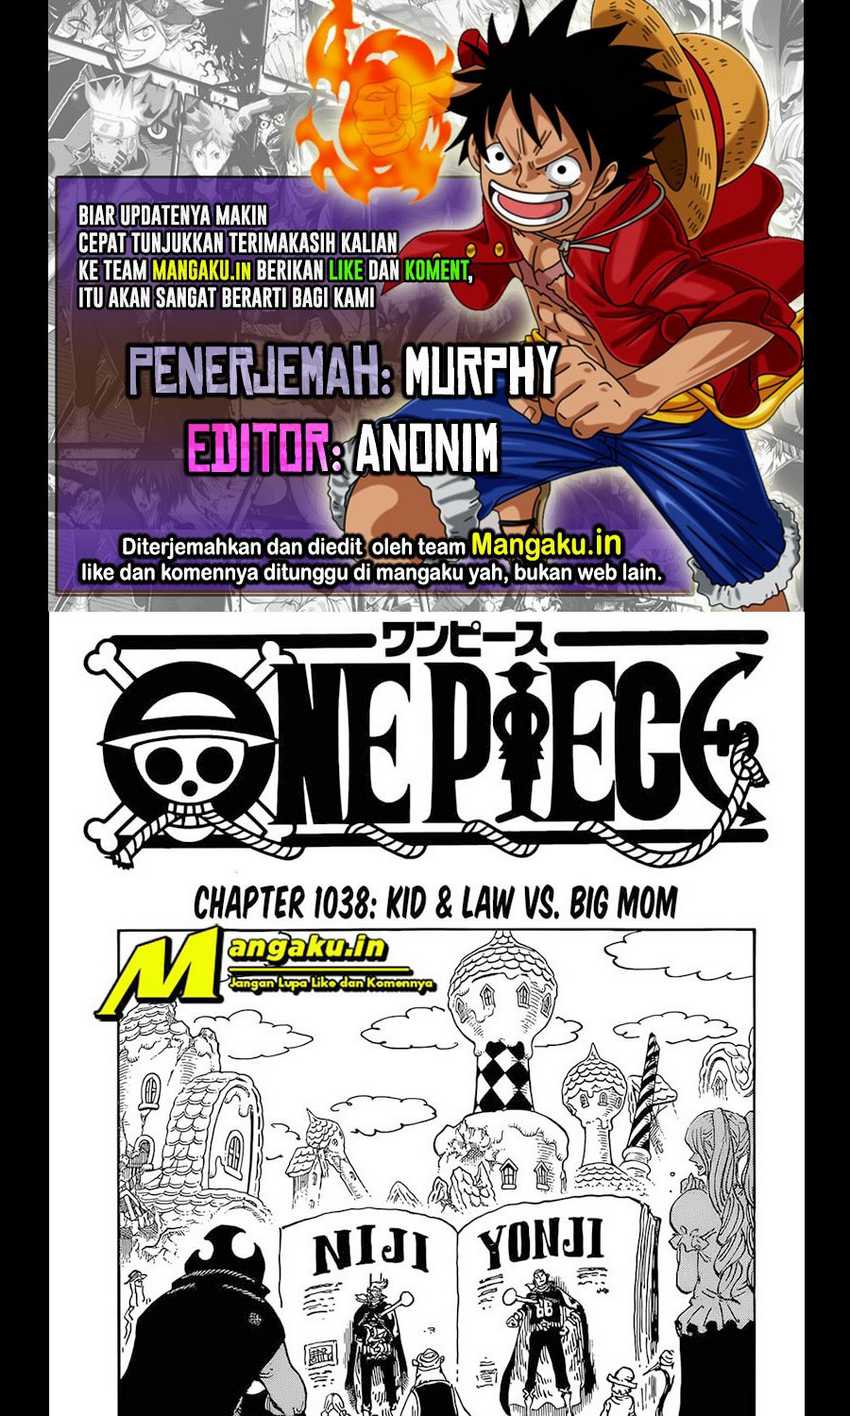 One Piece Chapter 1038